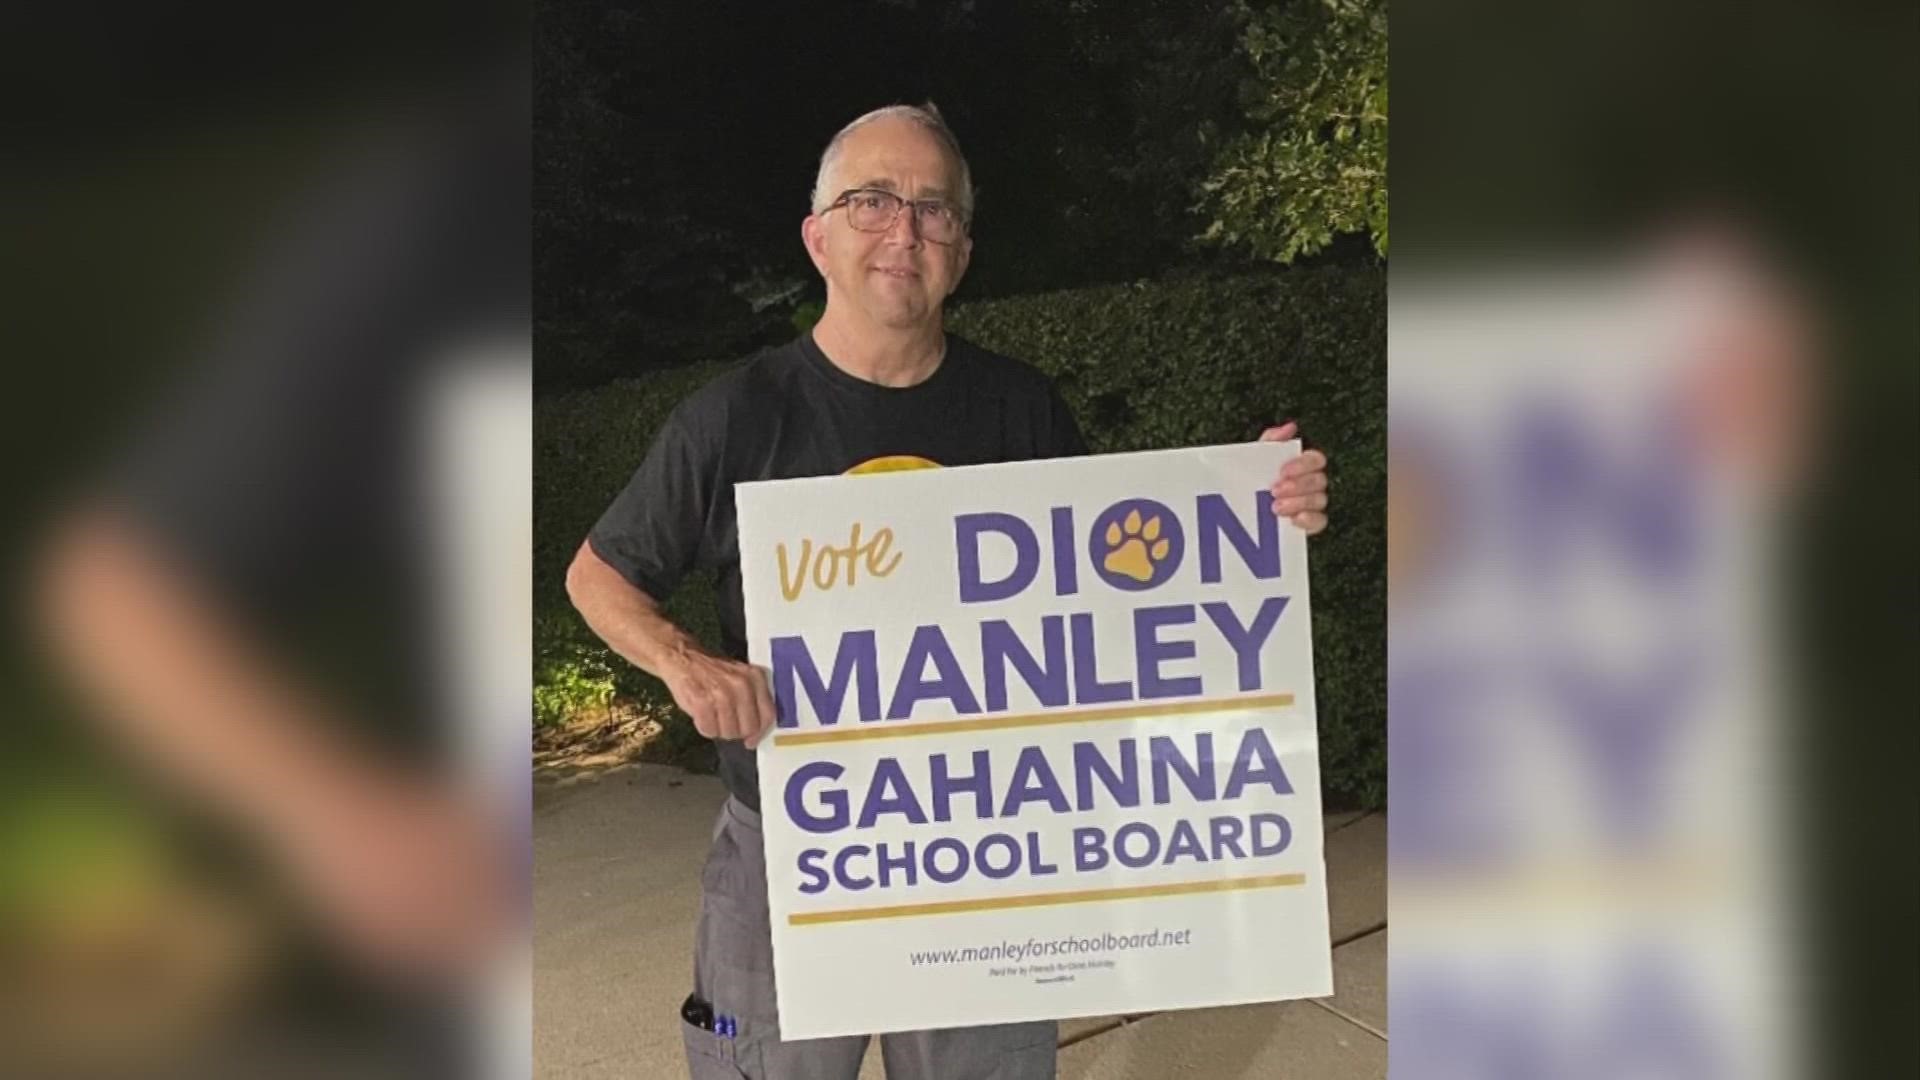 Dion Manley wants to be a voice for students and teachers while helping with other issues the district is facing.